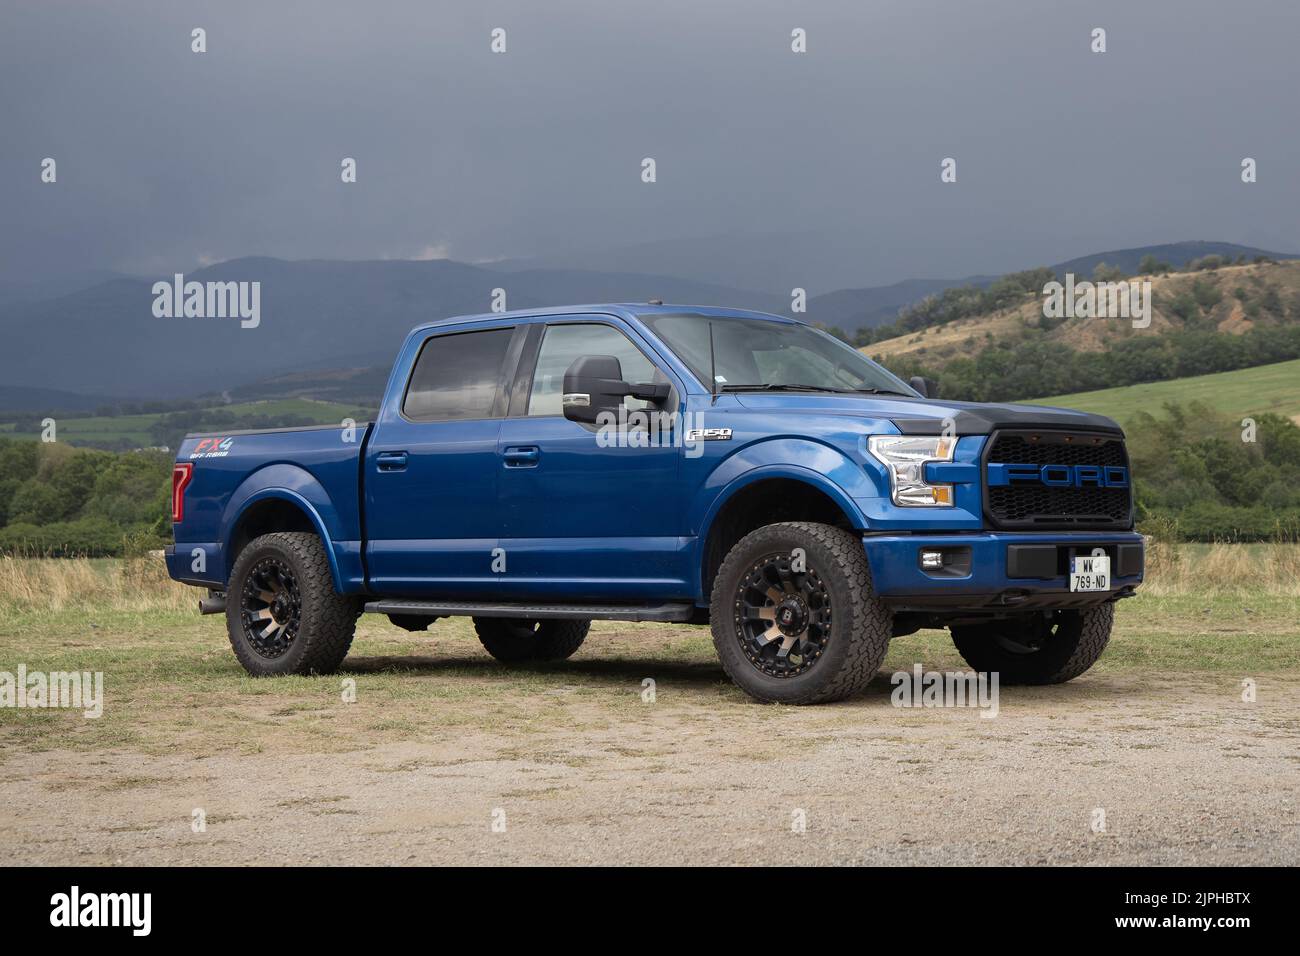 LLO, FRANCE-AUGUST 16, 2022: 2018 Ford F-150 XLT, thirteenth generation of F-Series, Ford Lobo Stock Photo